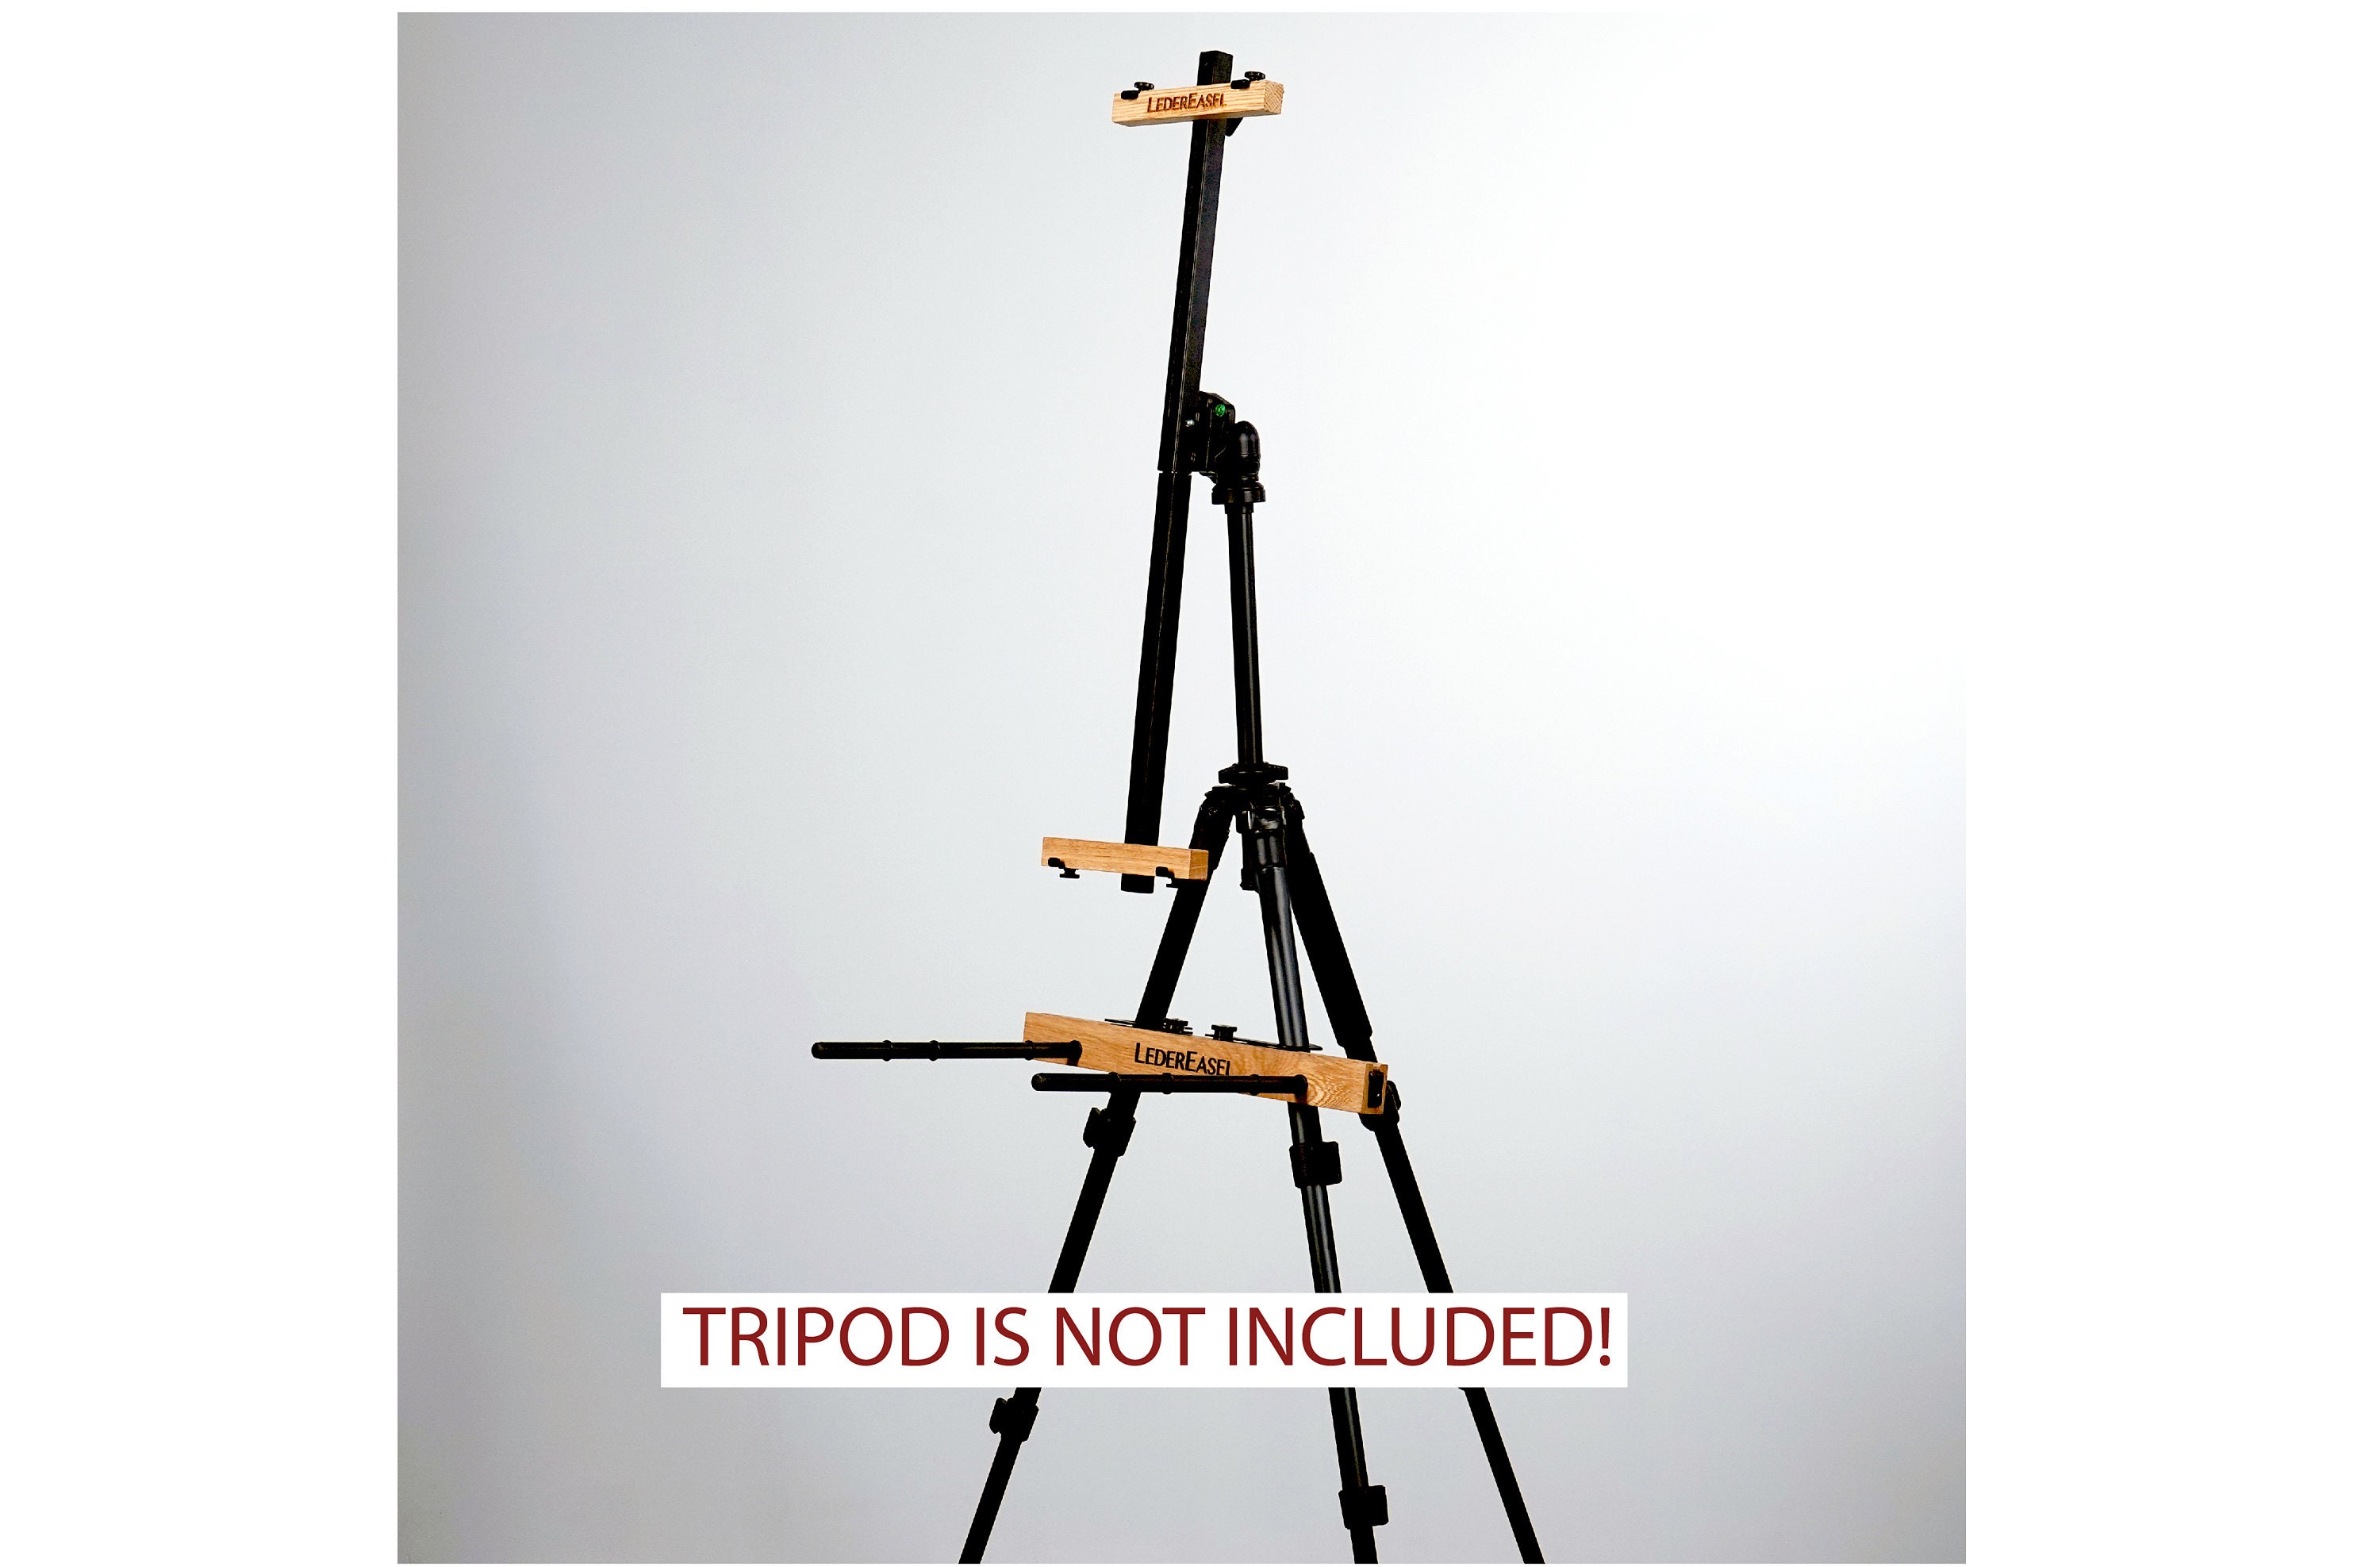 Artist Portable Adjustable Steel Folding Metal Easel , Carry Case  Adjustable to Go Flat or on an Angle Adjustable Height Folding Legs. 